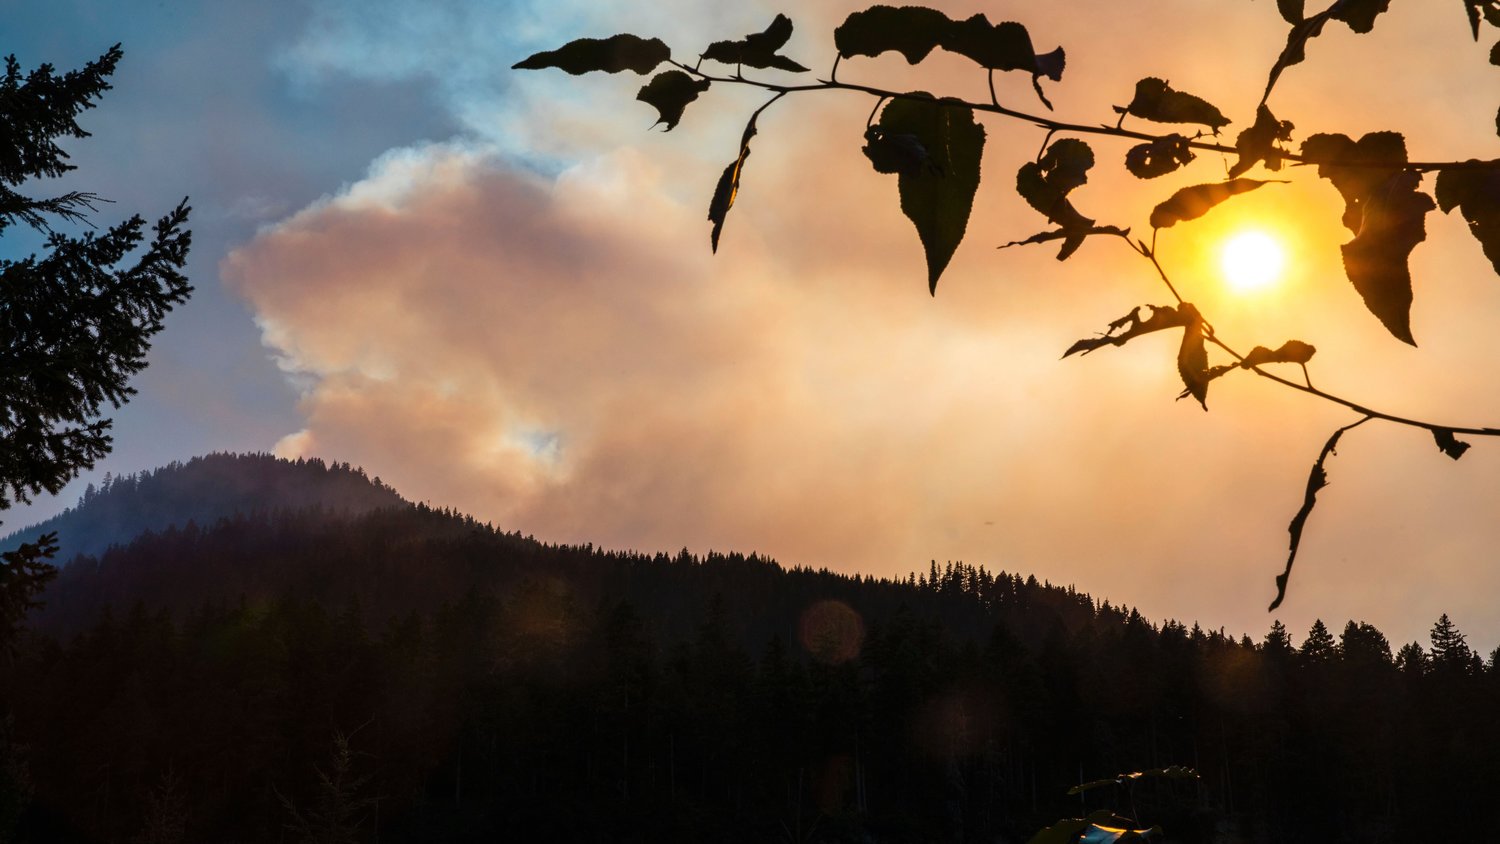 The sun shines through smoke from the Goat Rocks Fire on Sunday as seen from the Palisades Viewpoint off U.S. Highway 12 near Packwood Sunday.